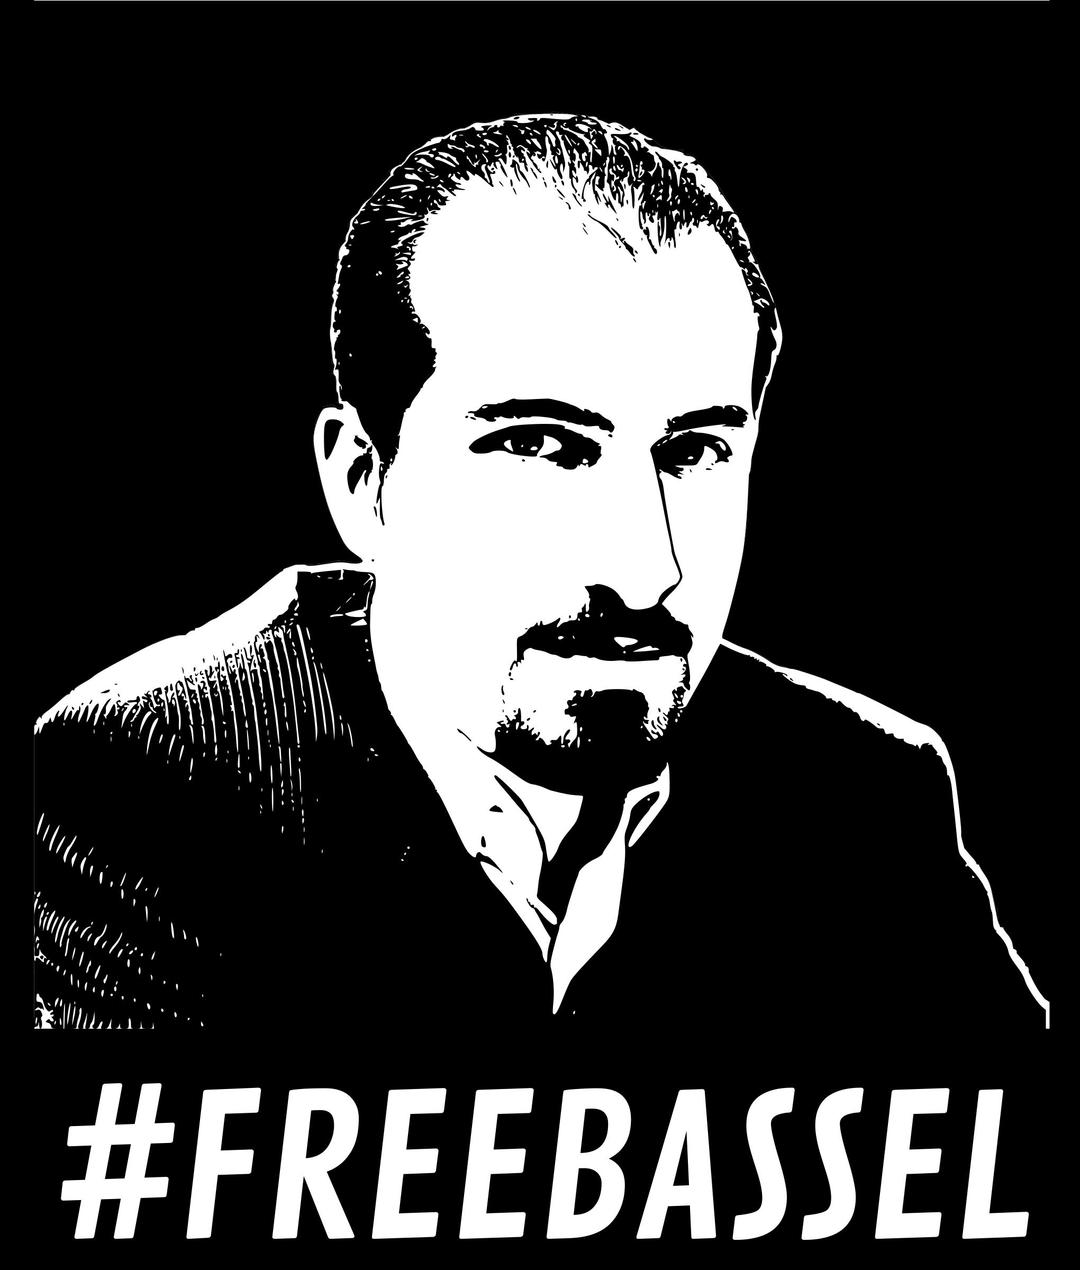 Freebassel black and white poster png transparent